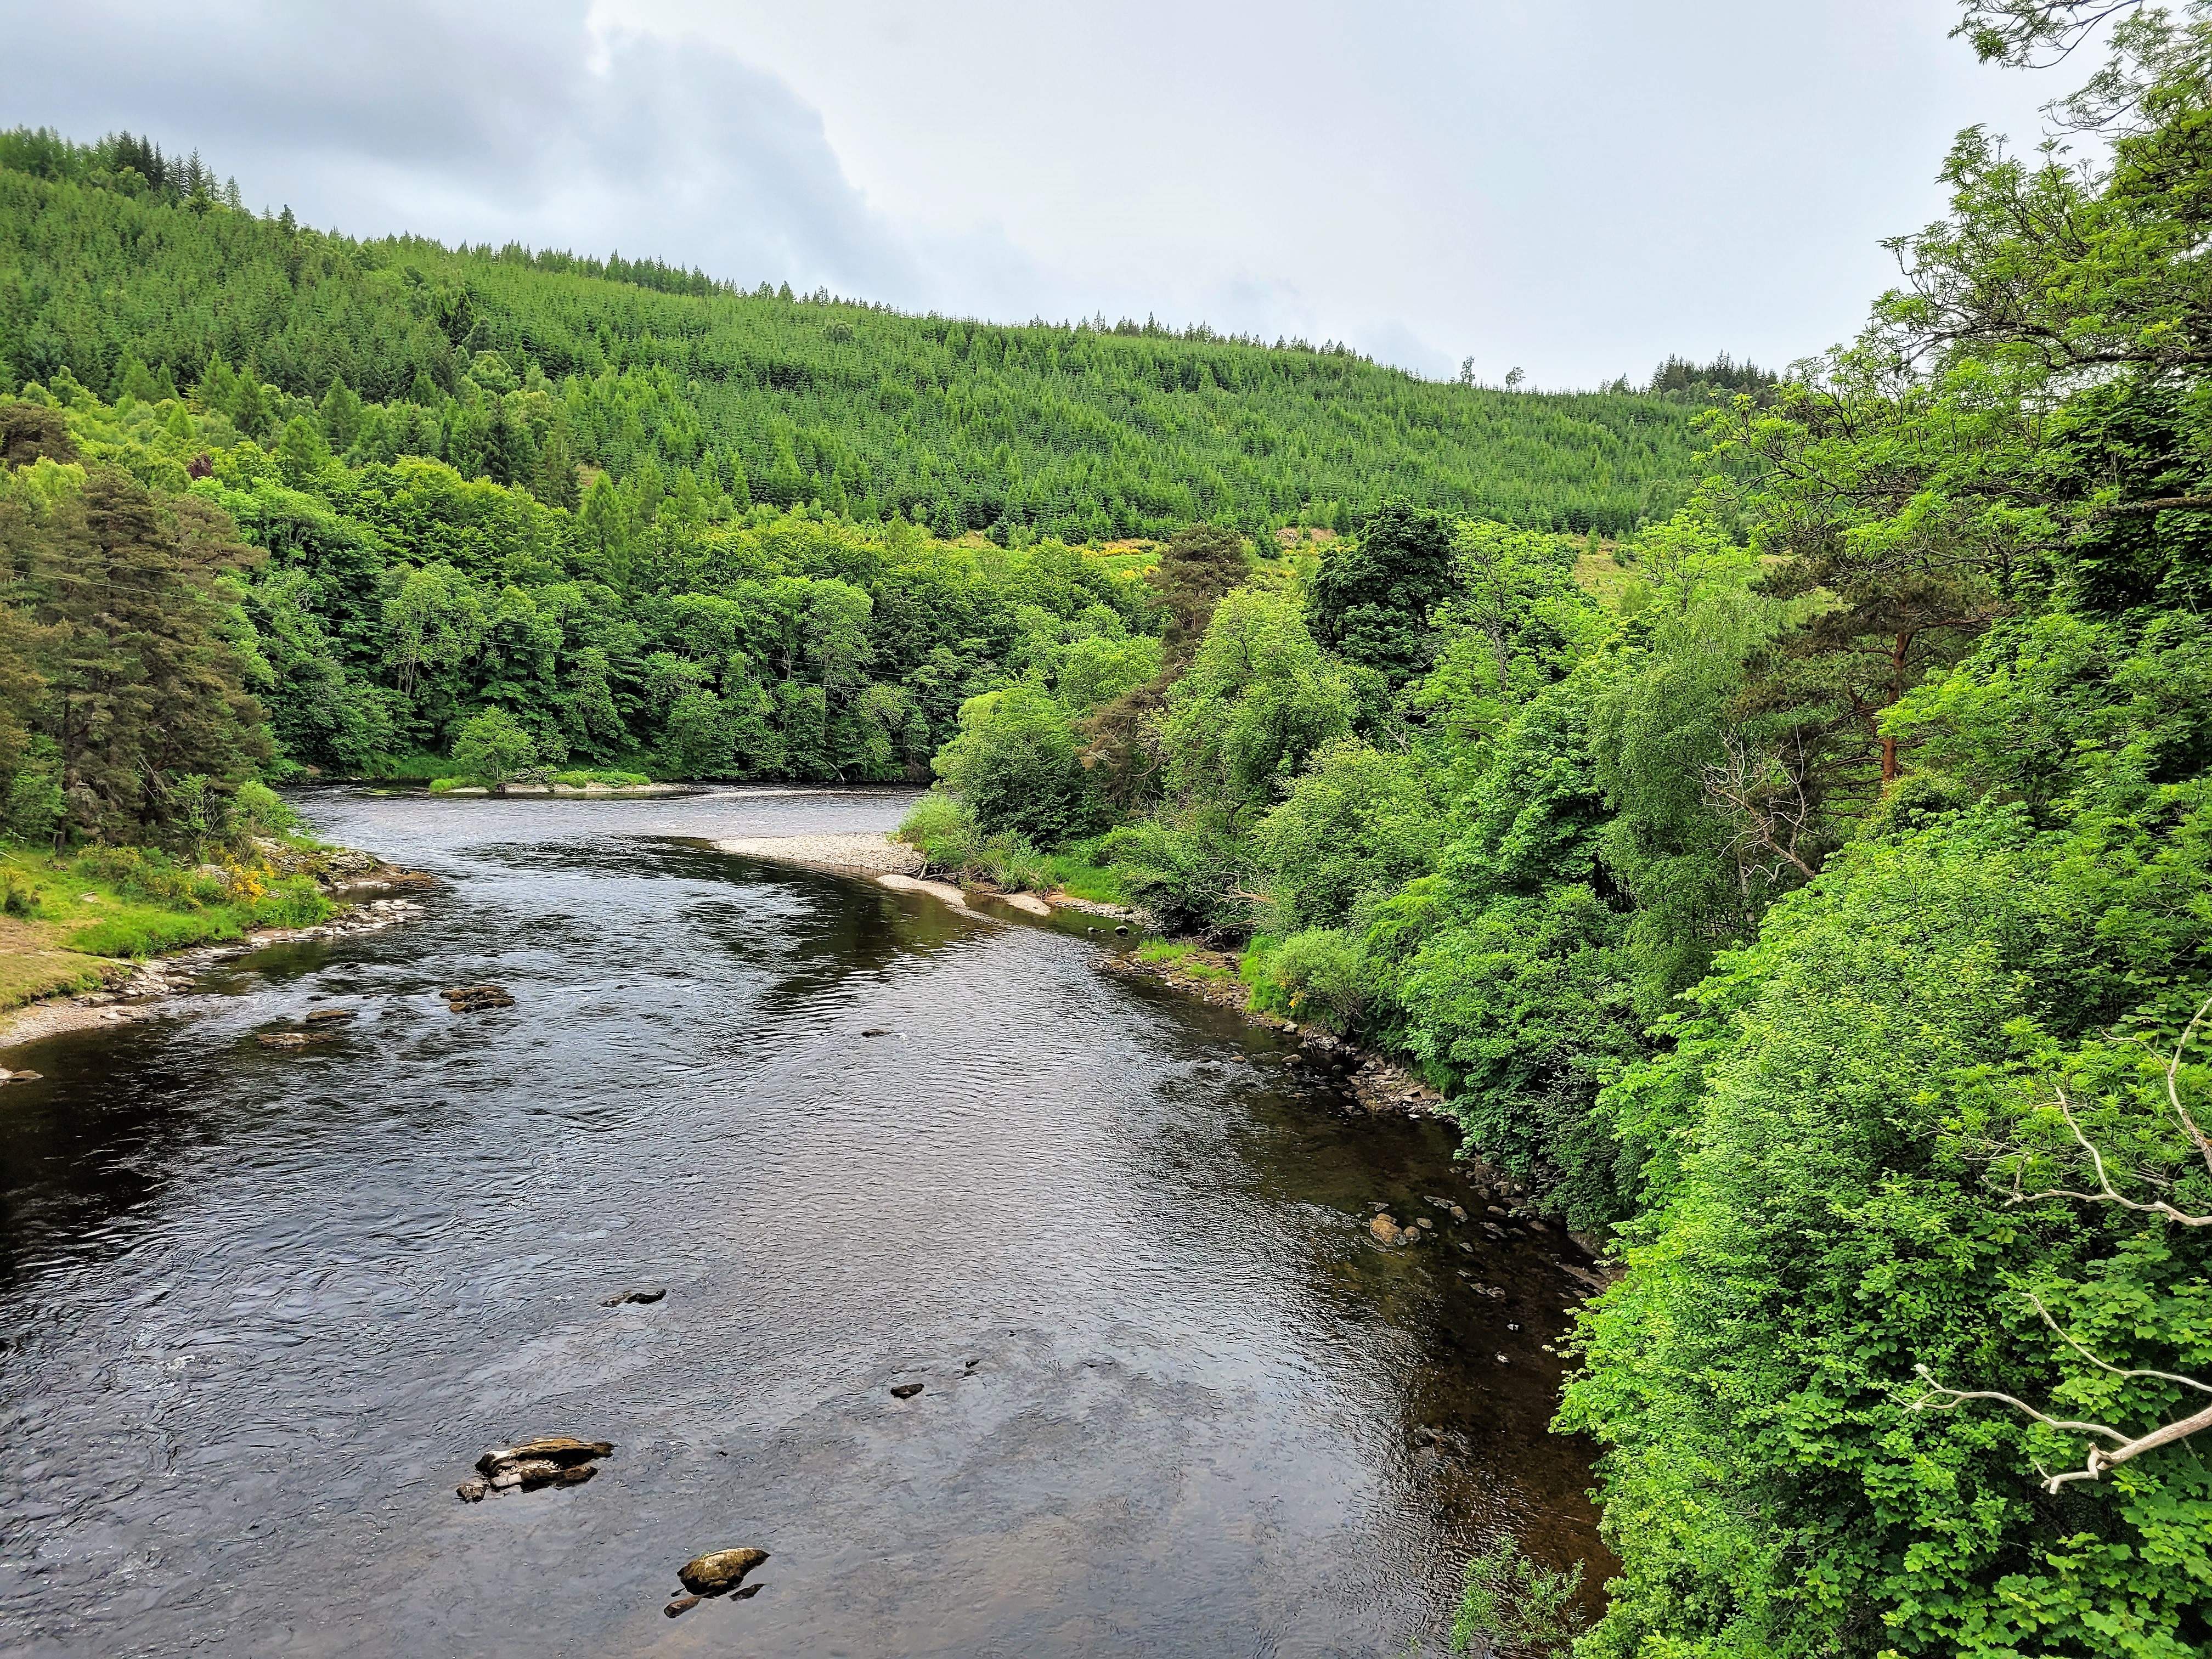 The beautiful River Spey from the bridge in Carron